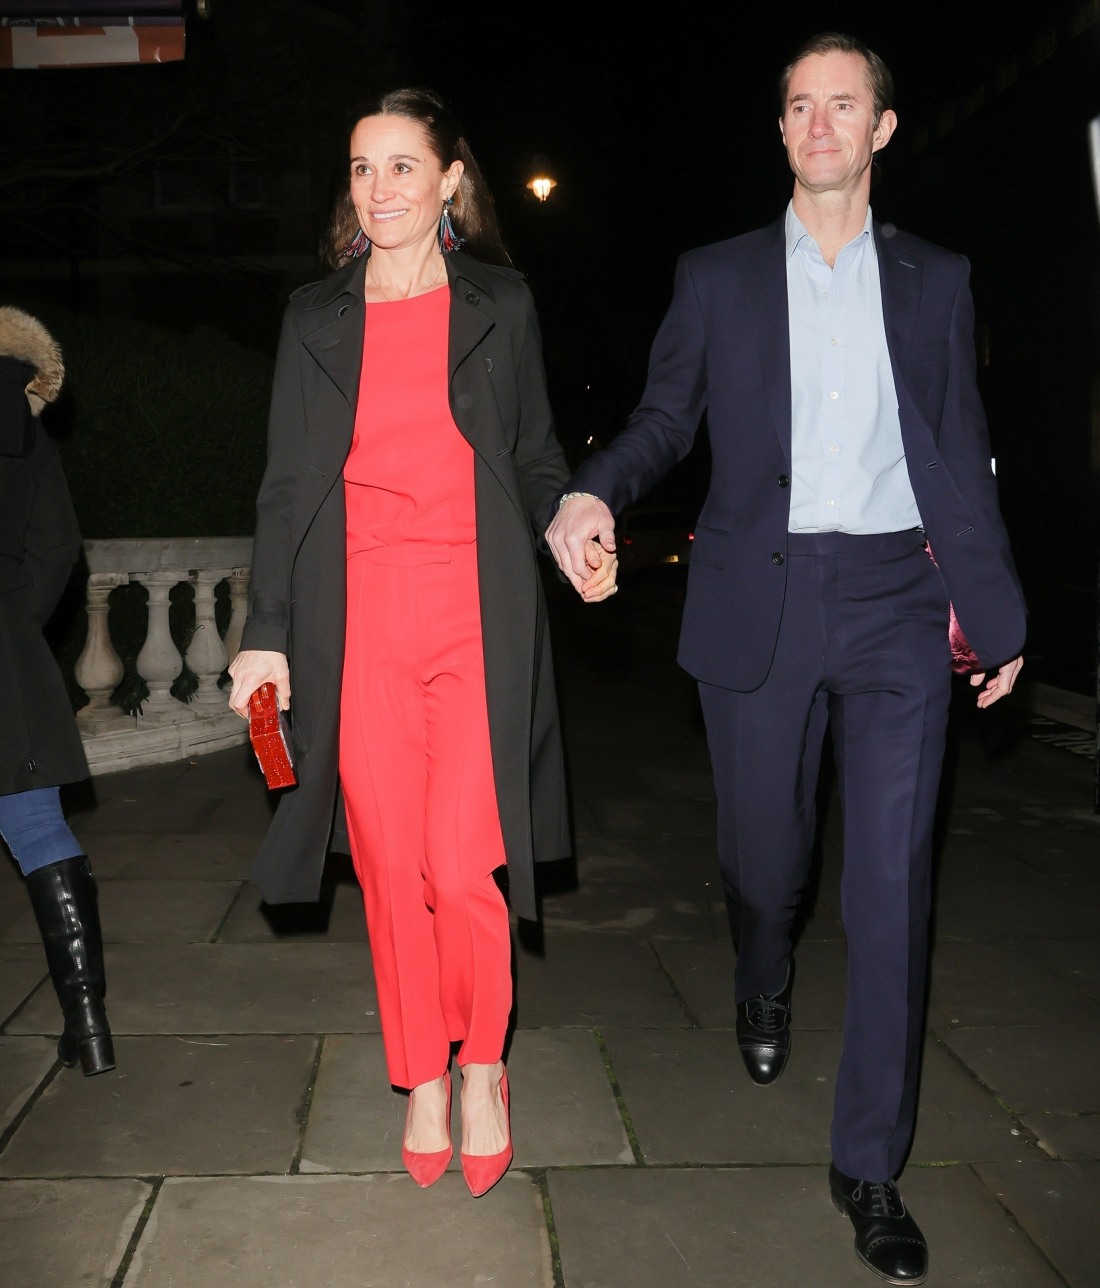 Pippa Middleton puts on a stylish display with husband James Matthews as they attend the Cirque du Soleil's Luizia at the Royal Albert Hall